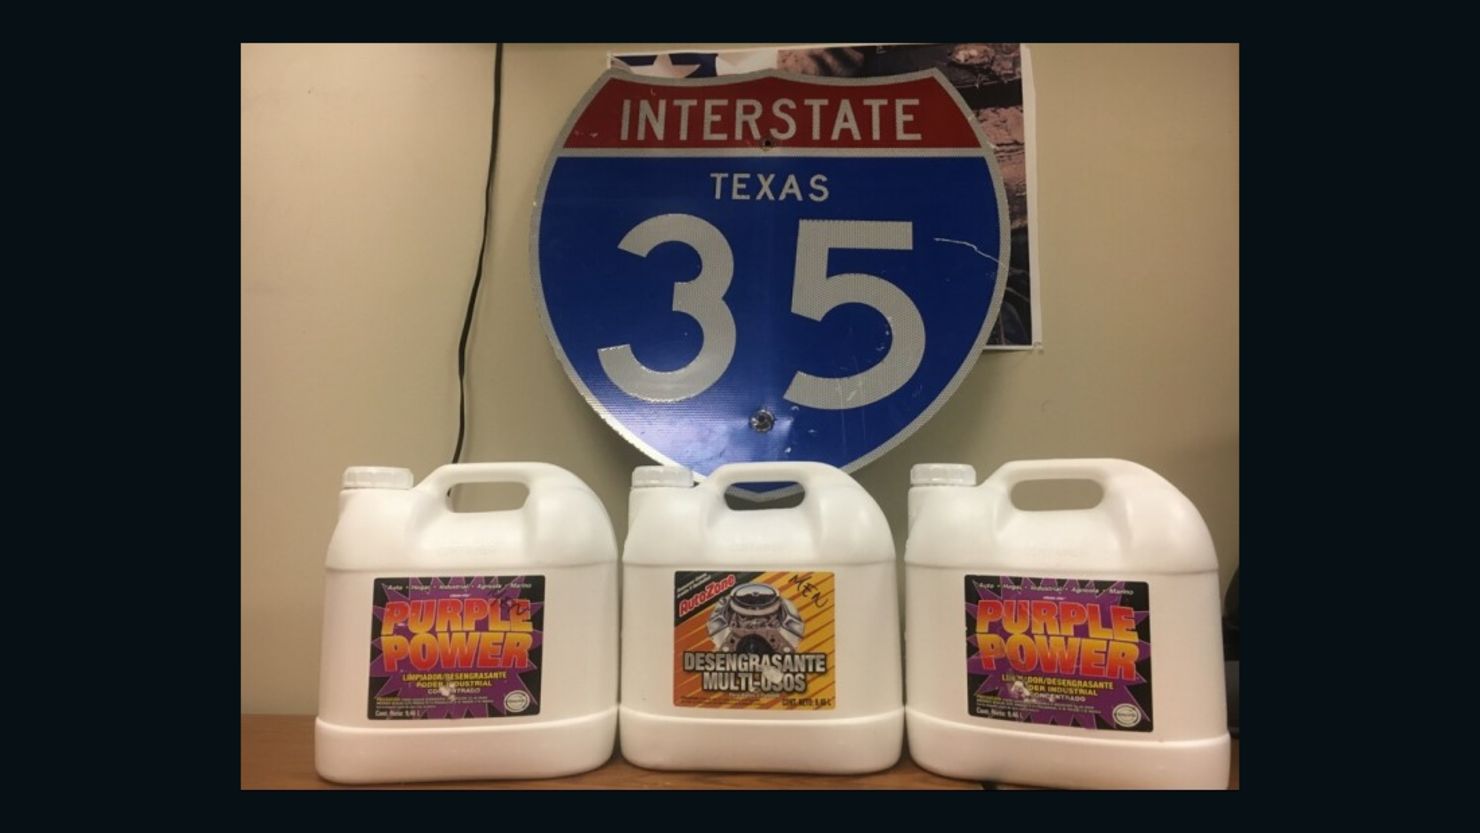 Emma, the Austin Police department's narcotics K-9 led officers to these three large liquid degreaser jugs hidden inside a 2013 Dodge Avenger, which contained the stash of liquid crystal meth, with an estimated street value of $2 million. 